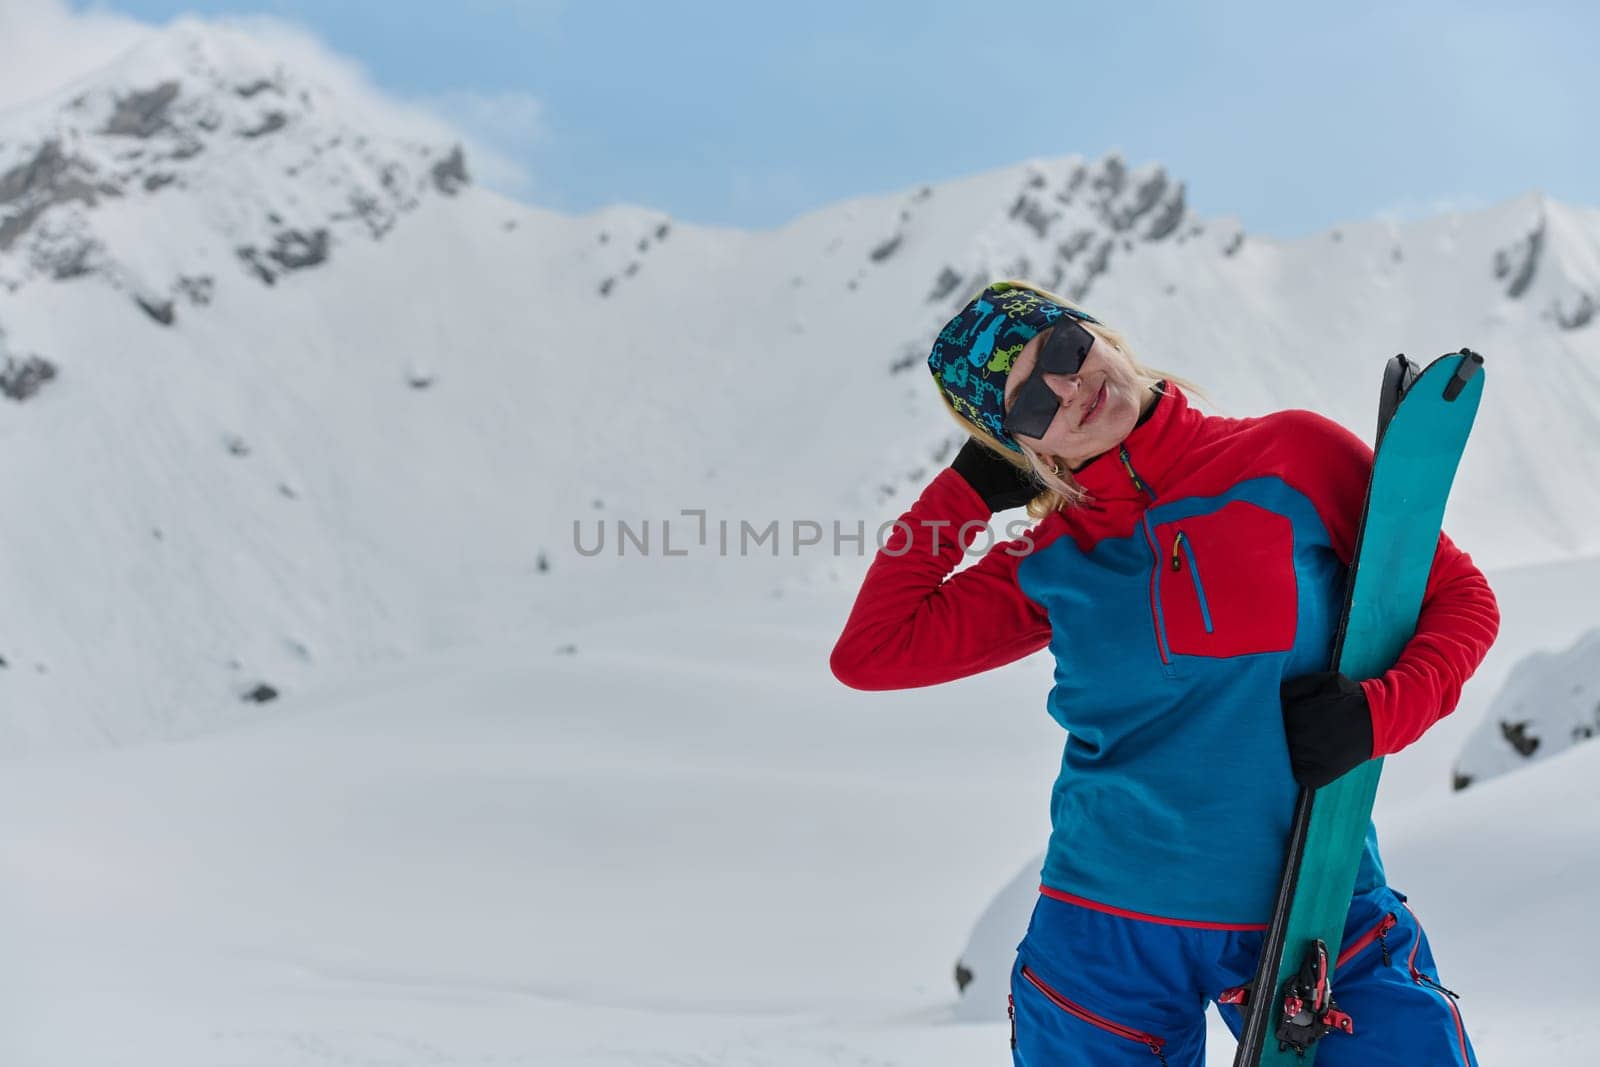 A professional woman skier rejoices after successfully climbing the snowy peaks of the Alps.